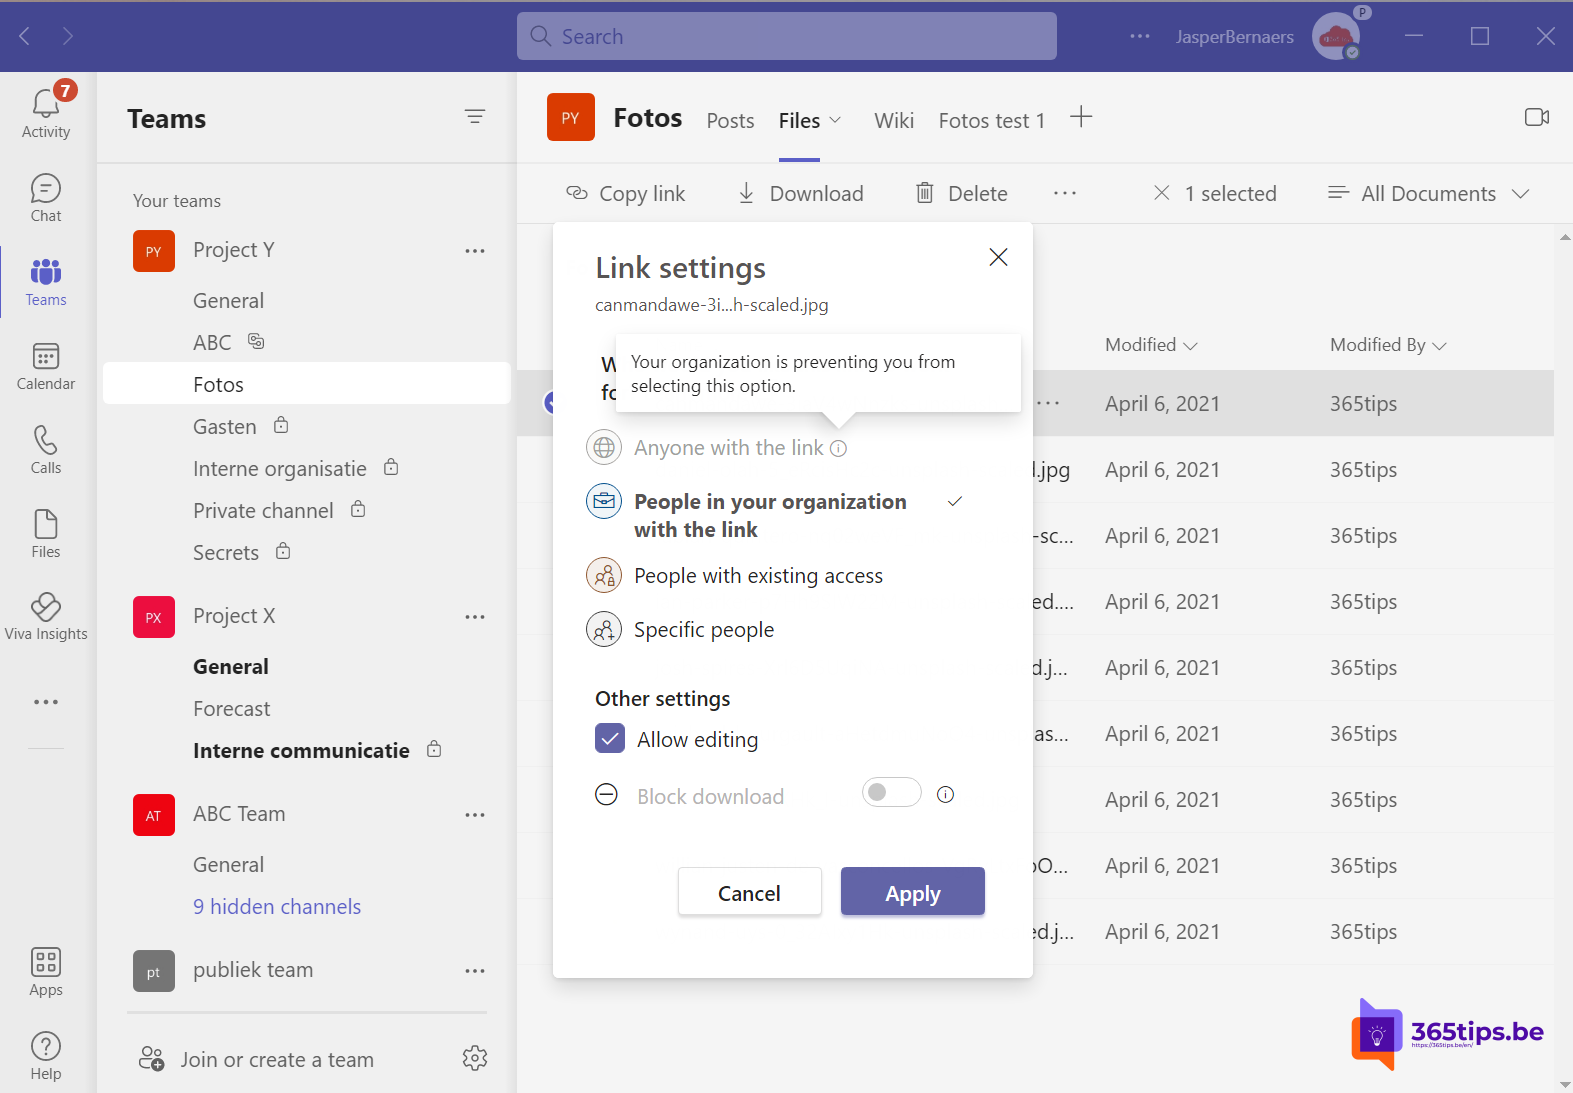 ⚒️ Sharing options are grayed out when sharing from Microsoft Teams, SharePoint or OneDrive